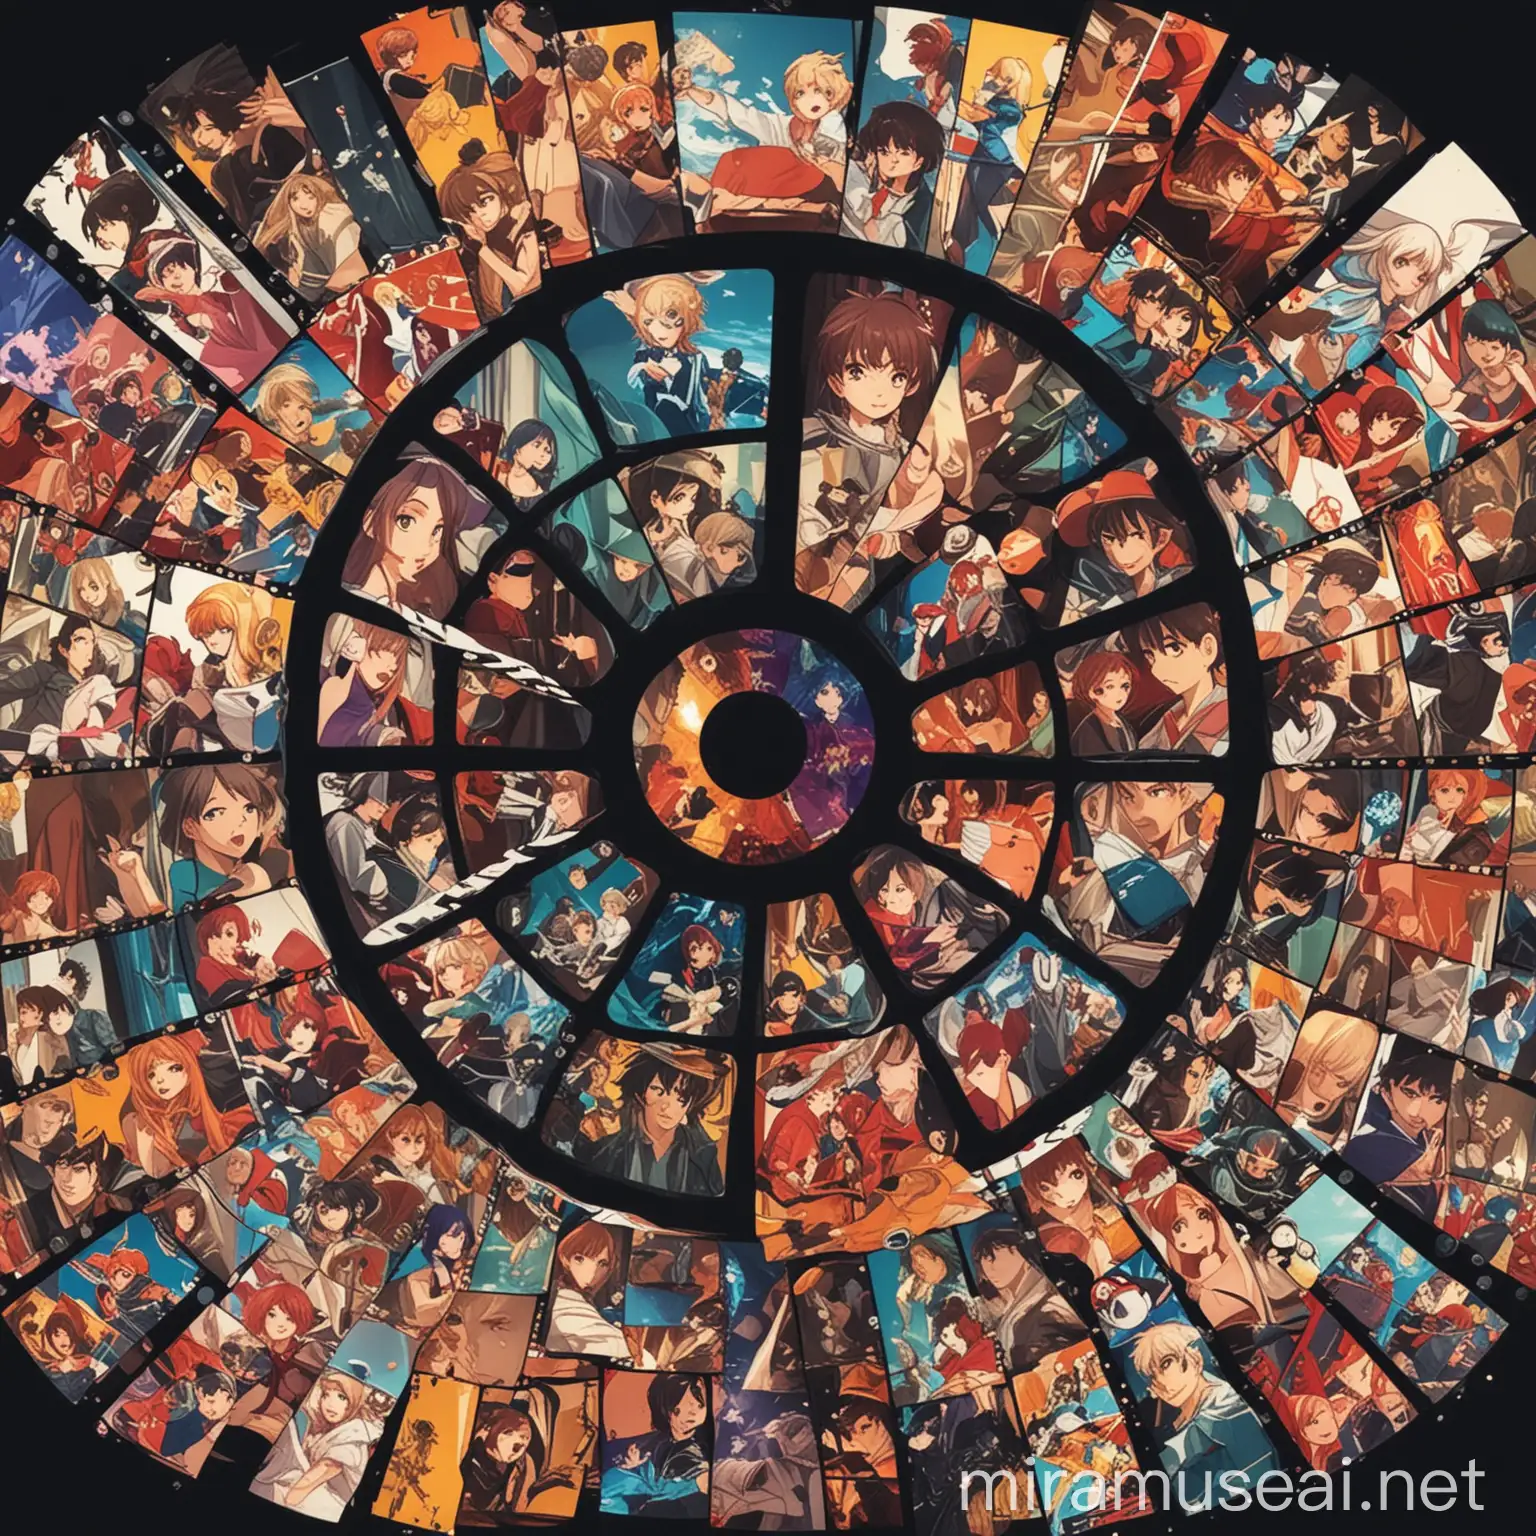 Design a thumbnail featuring iconic scenes from popular movies and anime series.Create a collage of colorful film reels interlaced with anime characters.Craft an image showcasing a montage of action-packed movie moments and emotional anime scenes.